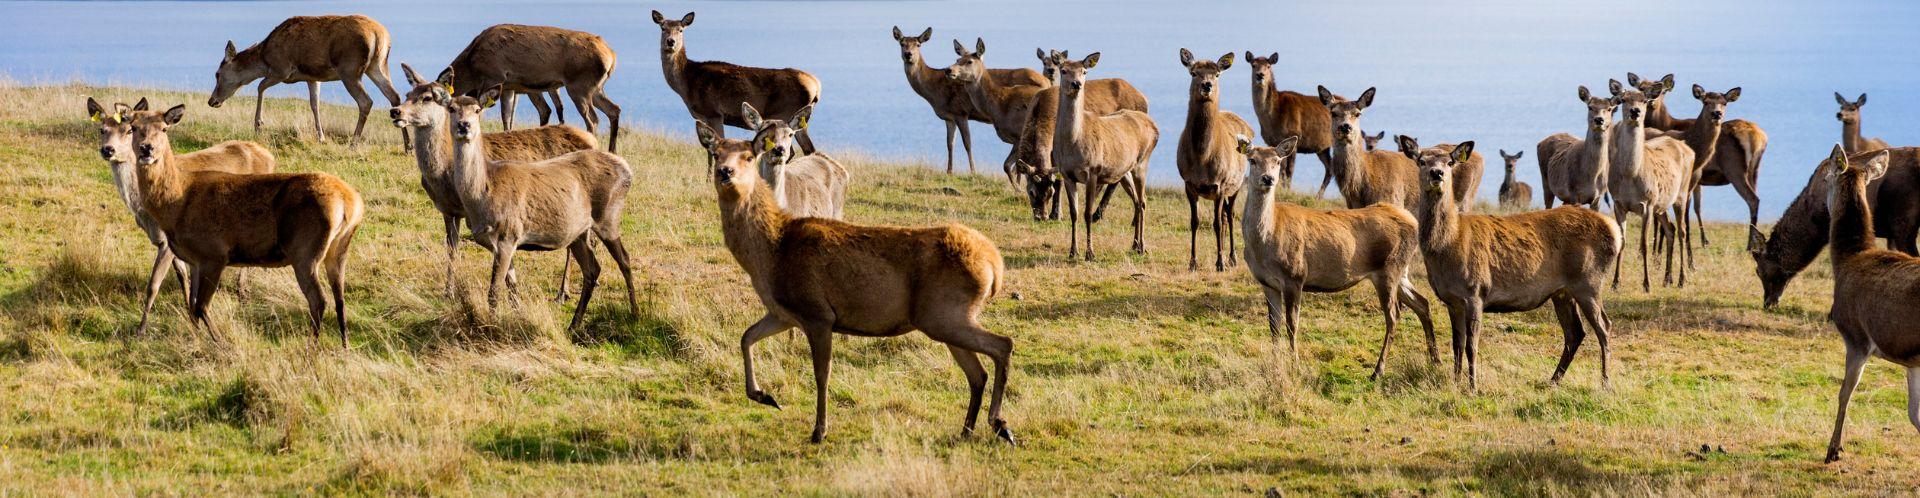 Ground-breaking Clinical Trial Finds Pāmu Deer Milk Improves Muscle Mass and Physical Performance